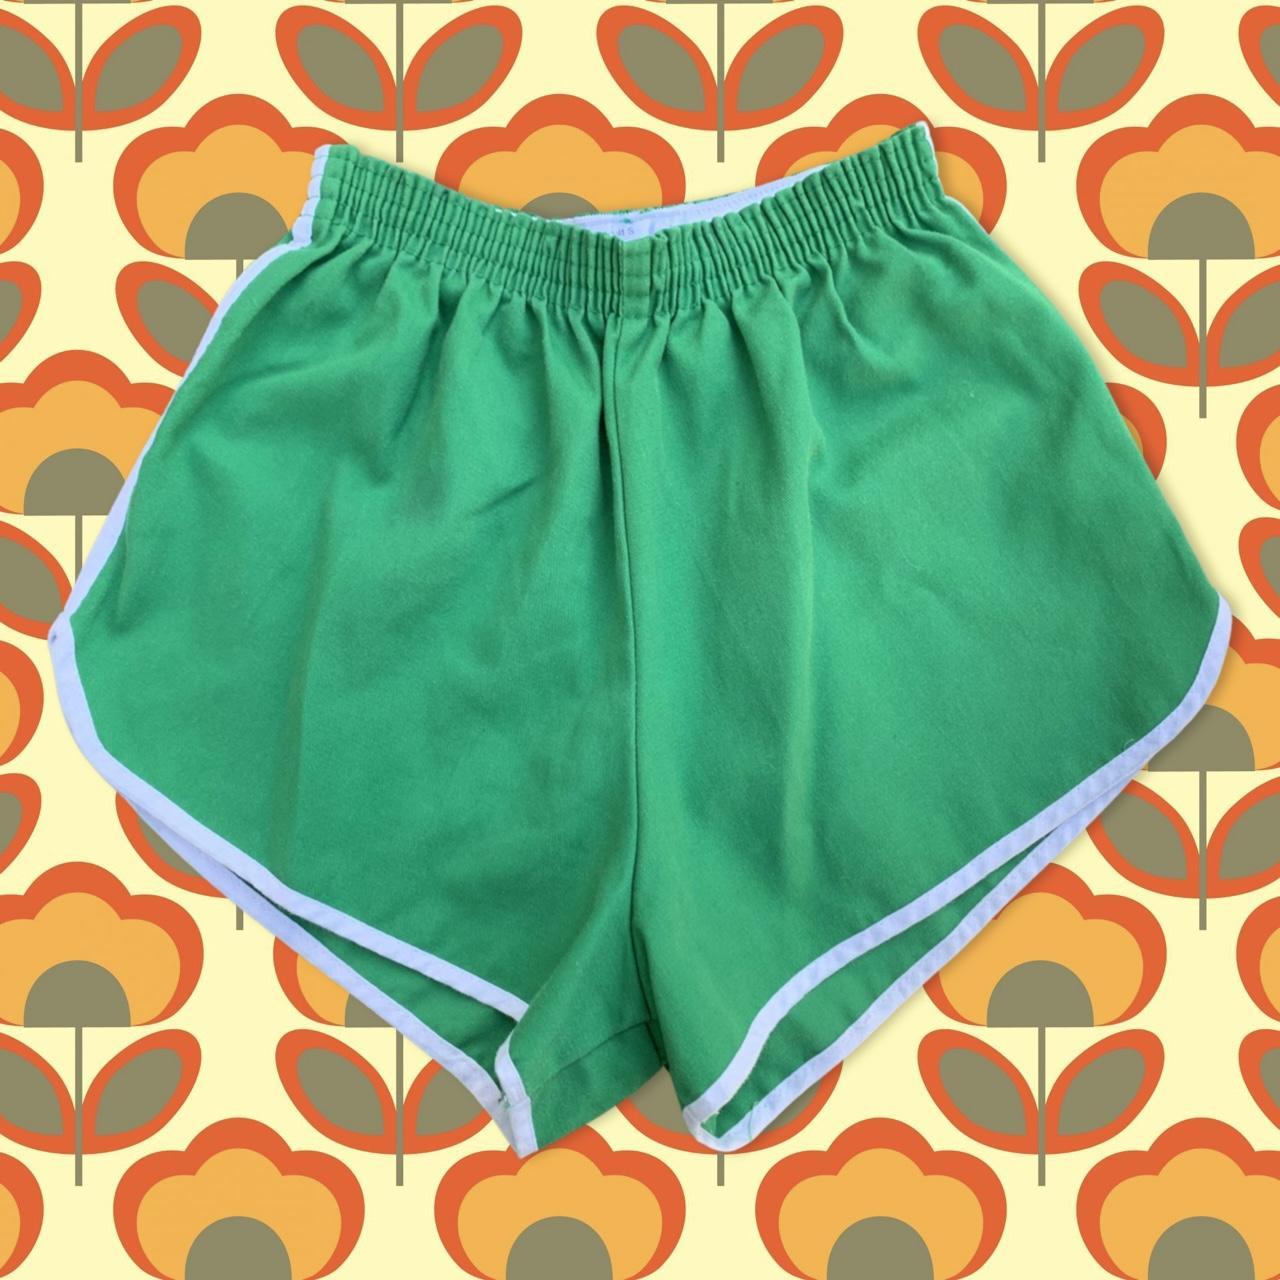 Kelly Green Retro Running Shorts with Gold Trim Small 